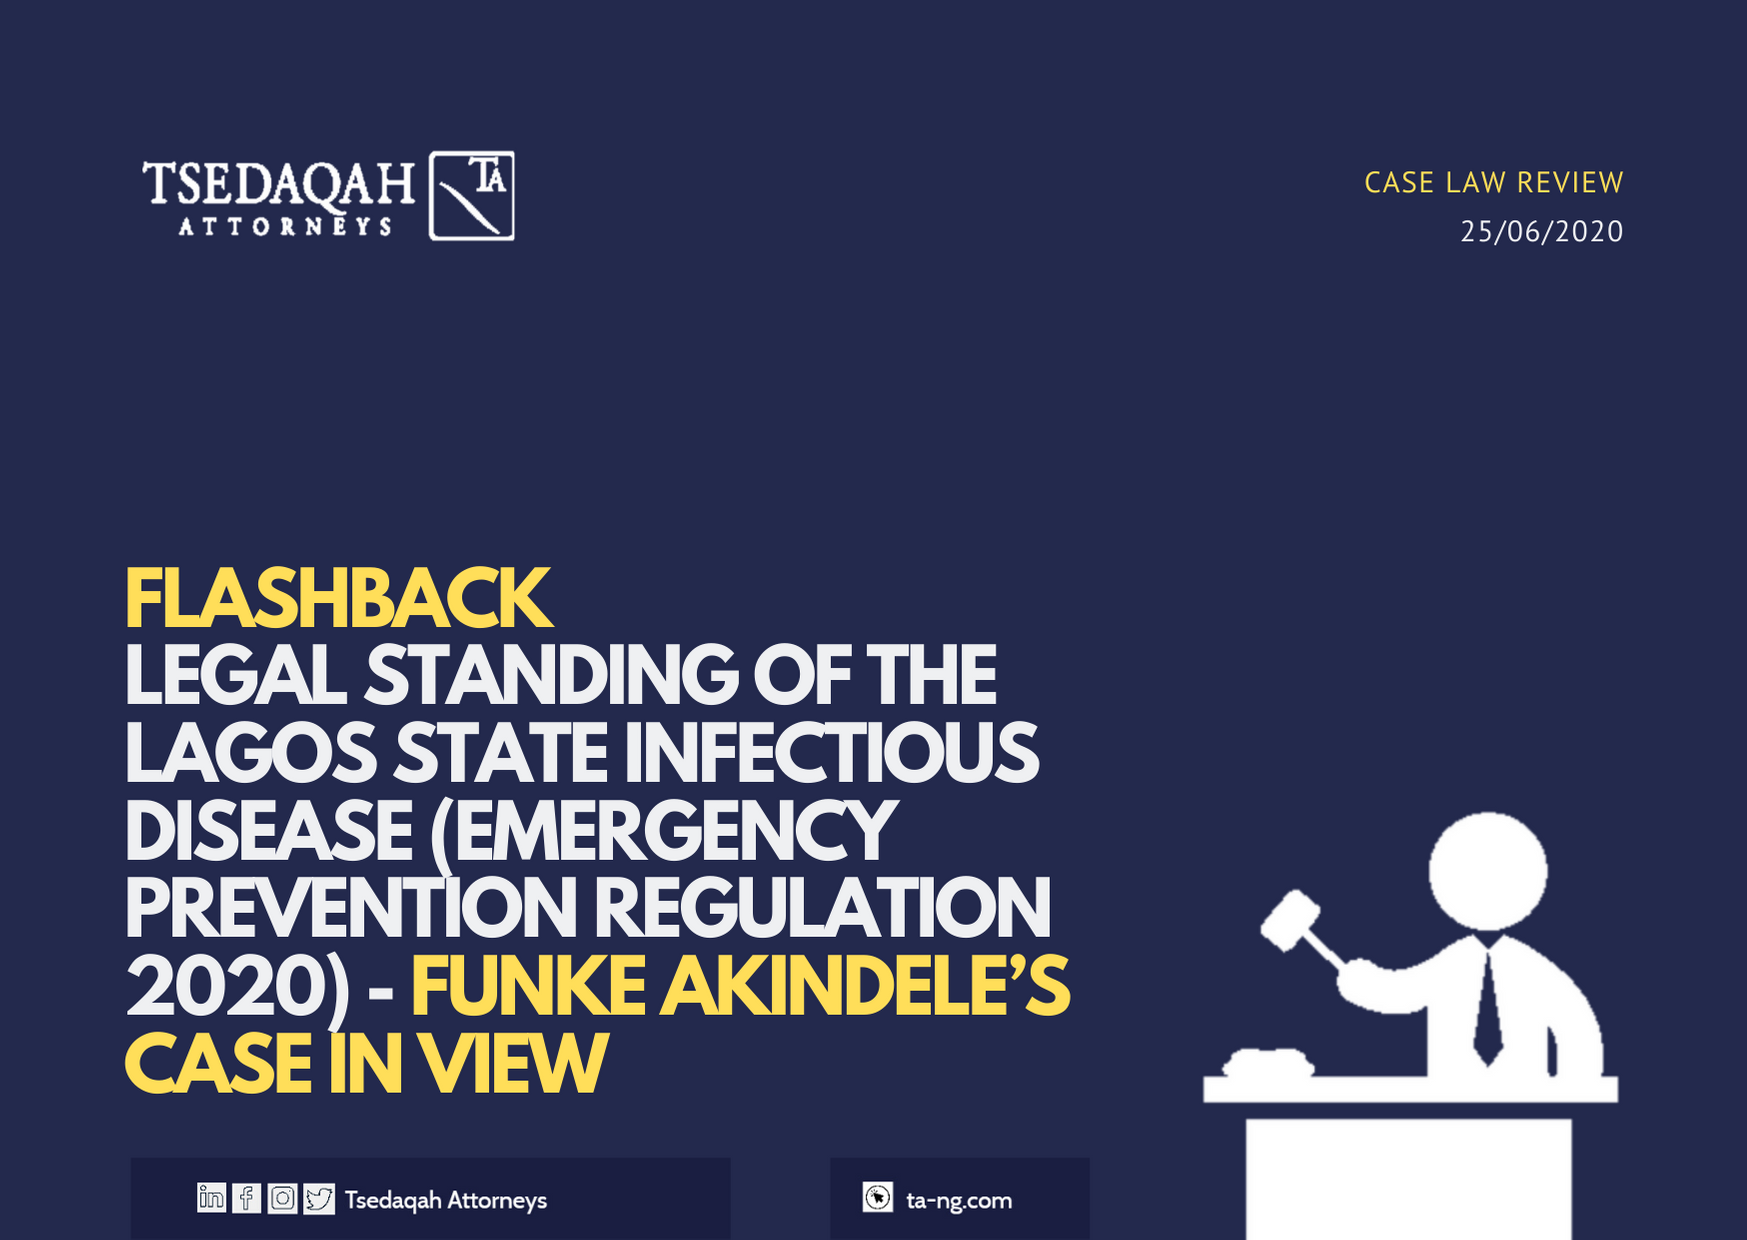 FLASHBACK – LEGAL STANDING OF THE LAGOS STATE INFECTIOUS DISEASE (EMERGENCY PREVENTION REGULATION 2020) – FUNKE AKINDELE’S CASE IN VIEW